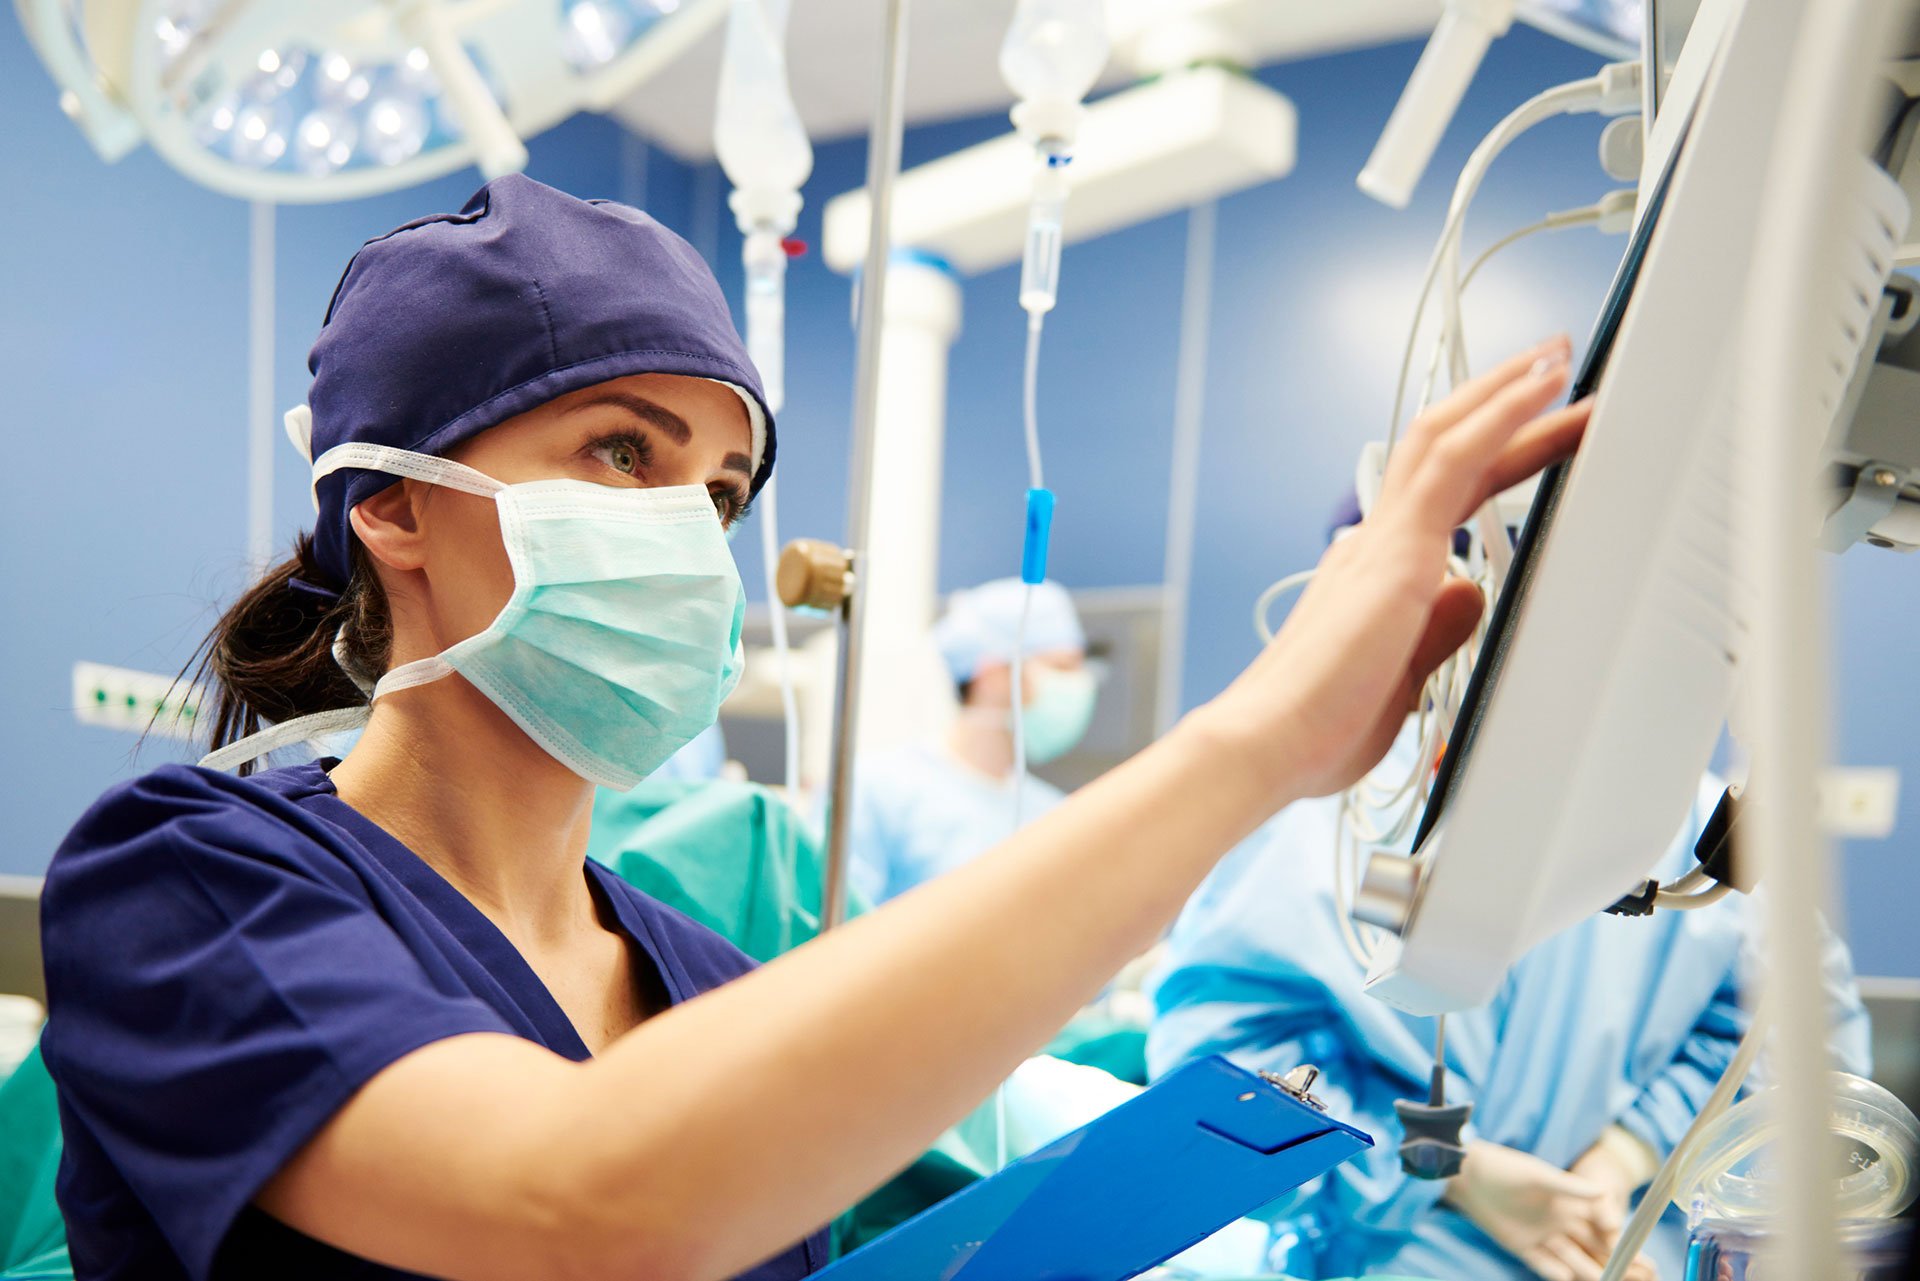 A nurse using a lot/loMT device in an operating room.